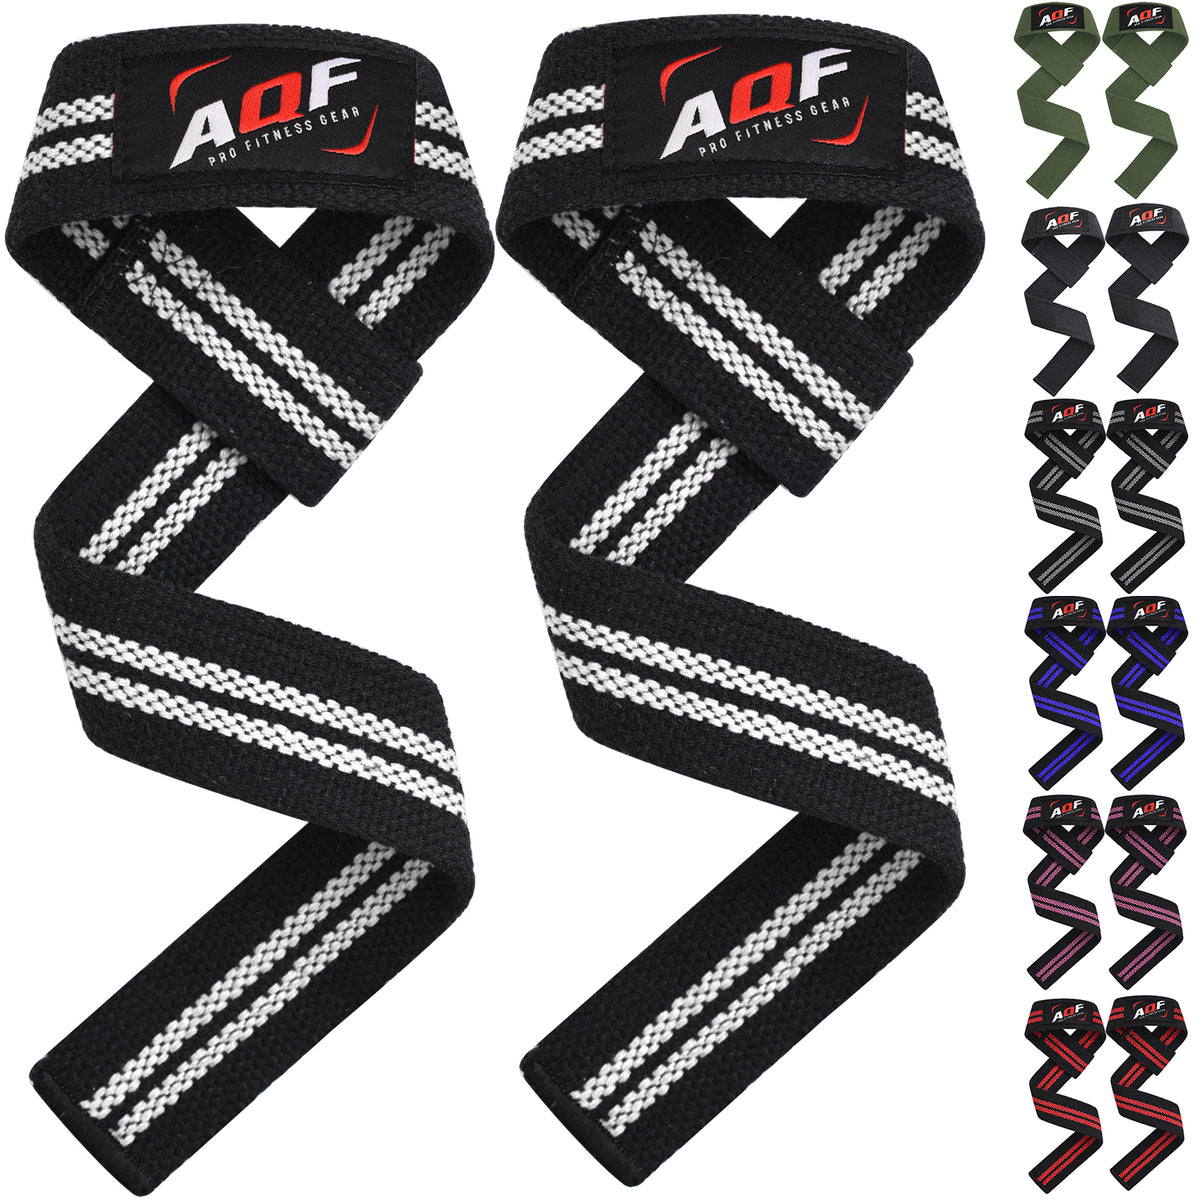 AQF Wrist Wrap Hand Support Brace Support Weight Lifting Gym Strap 